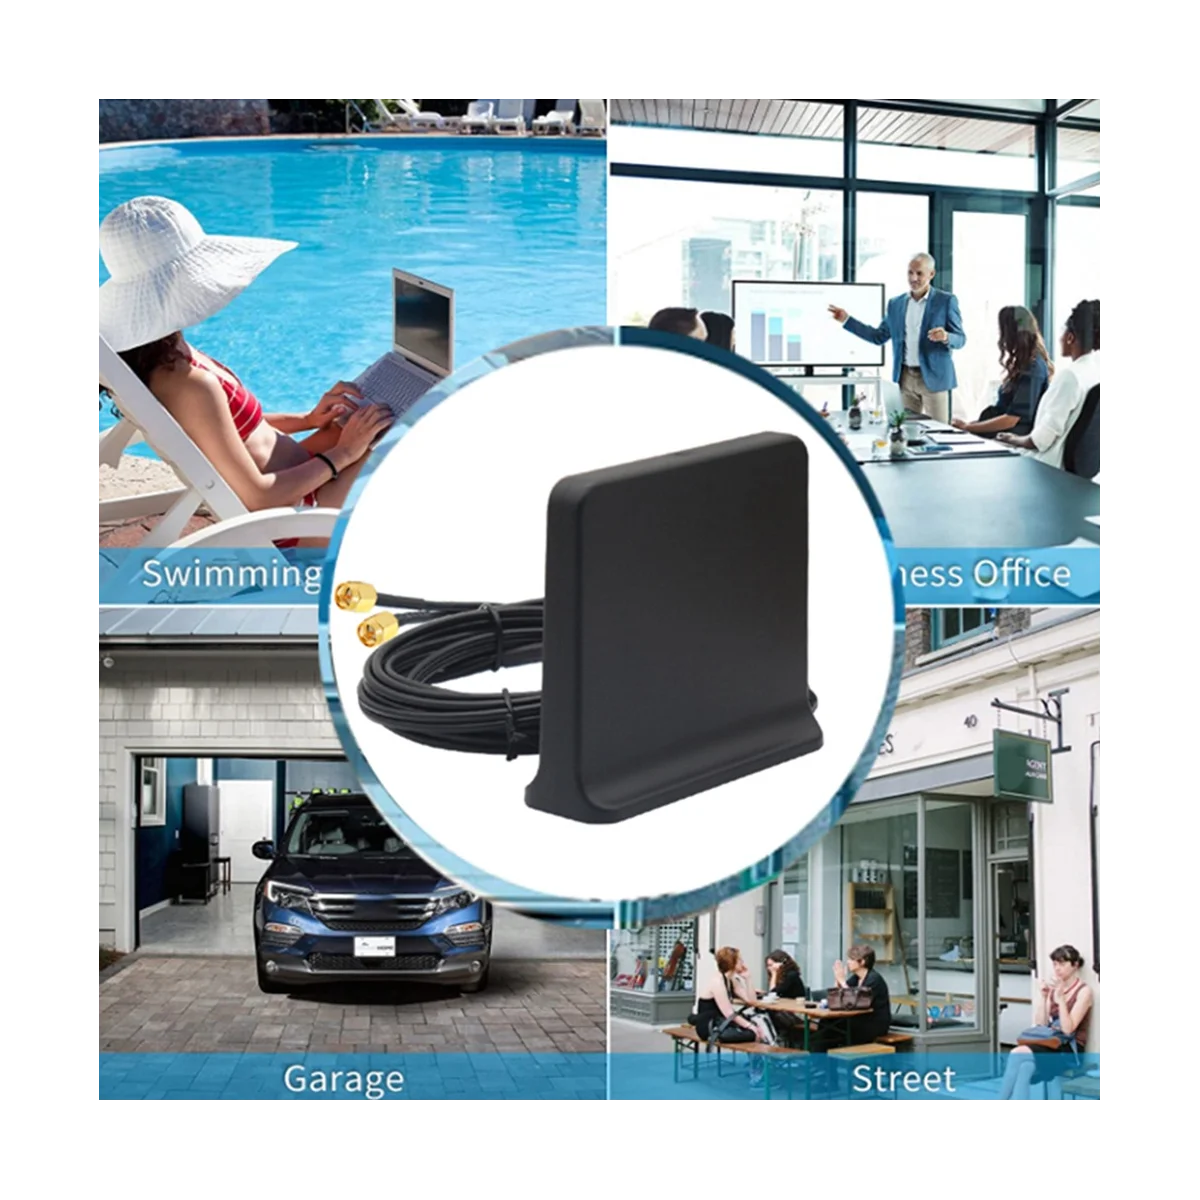 

Signal Boost 5G 4G LTE 3G GSM Mimo Aerial High Gain 12Dbi 600-6000Mhz External Omni WiFi Antenna(Black with Ts9 Adapter)